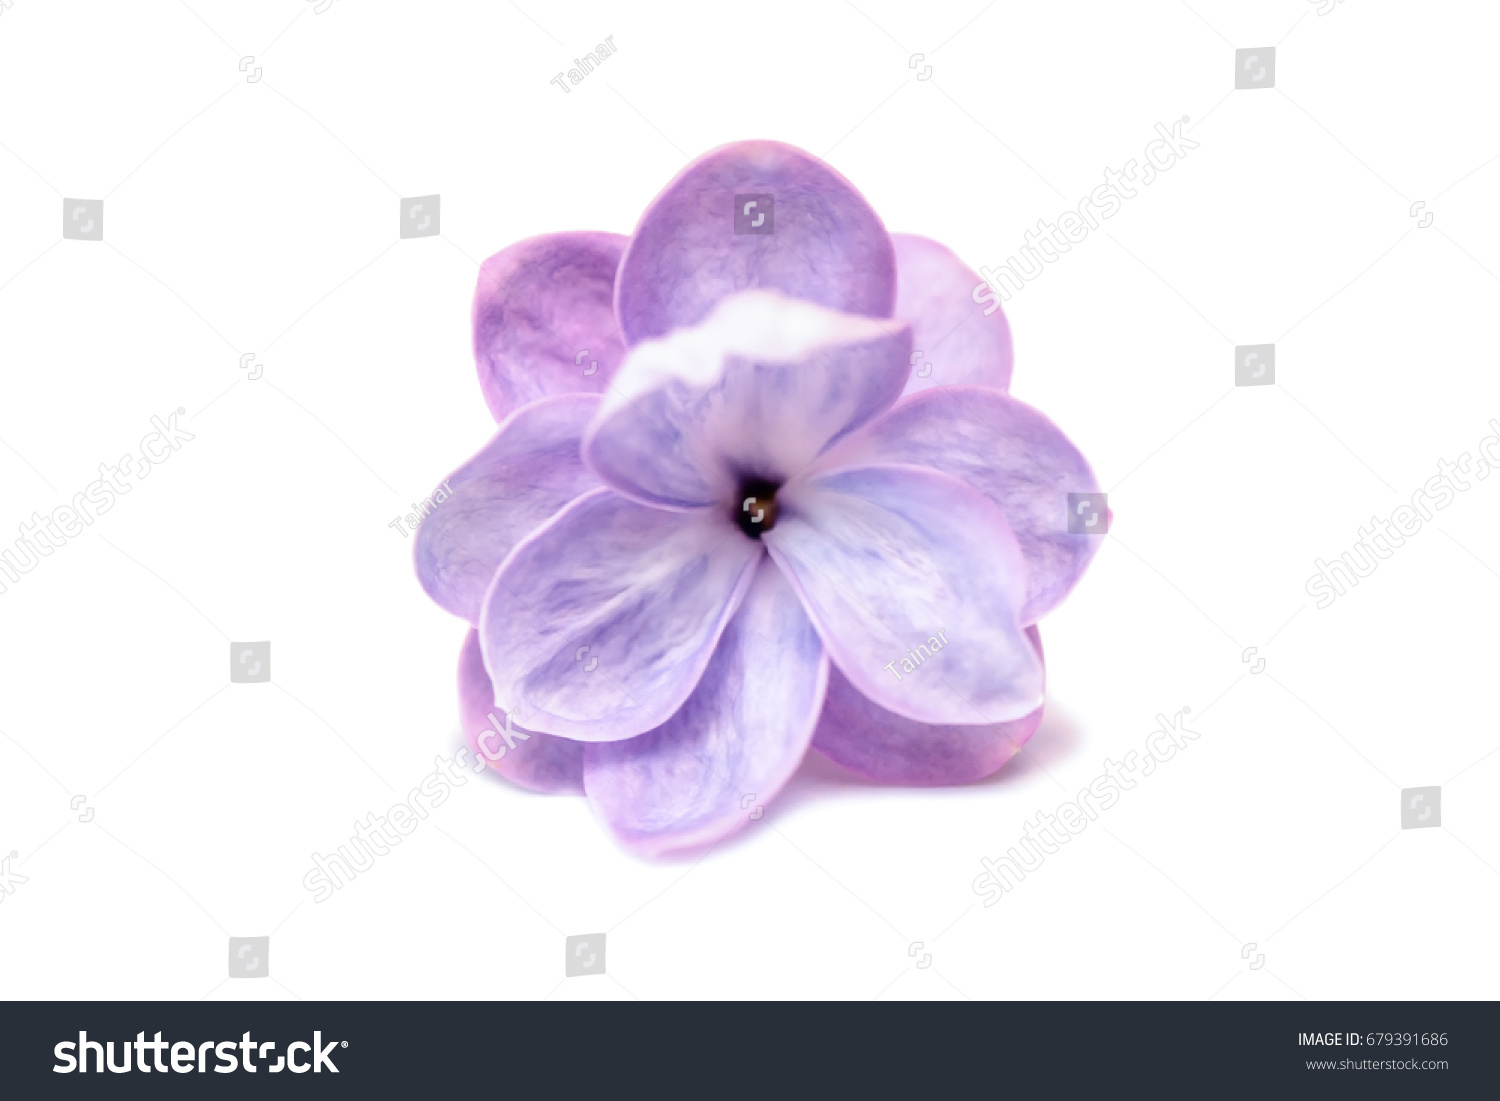 Lilac single flower isolated on a white background #679391686